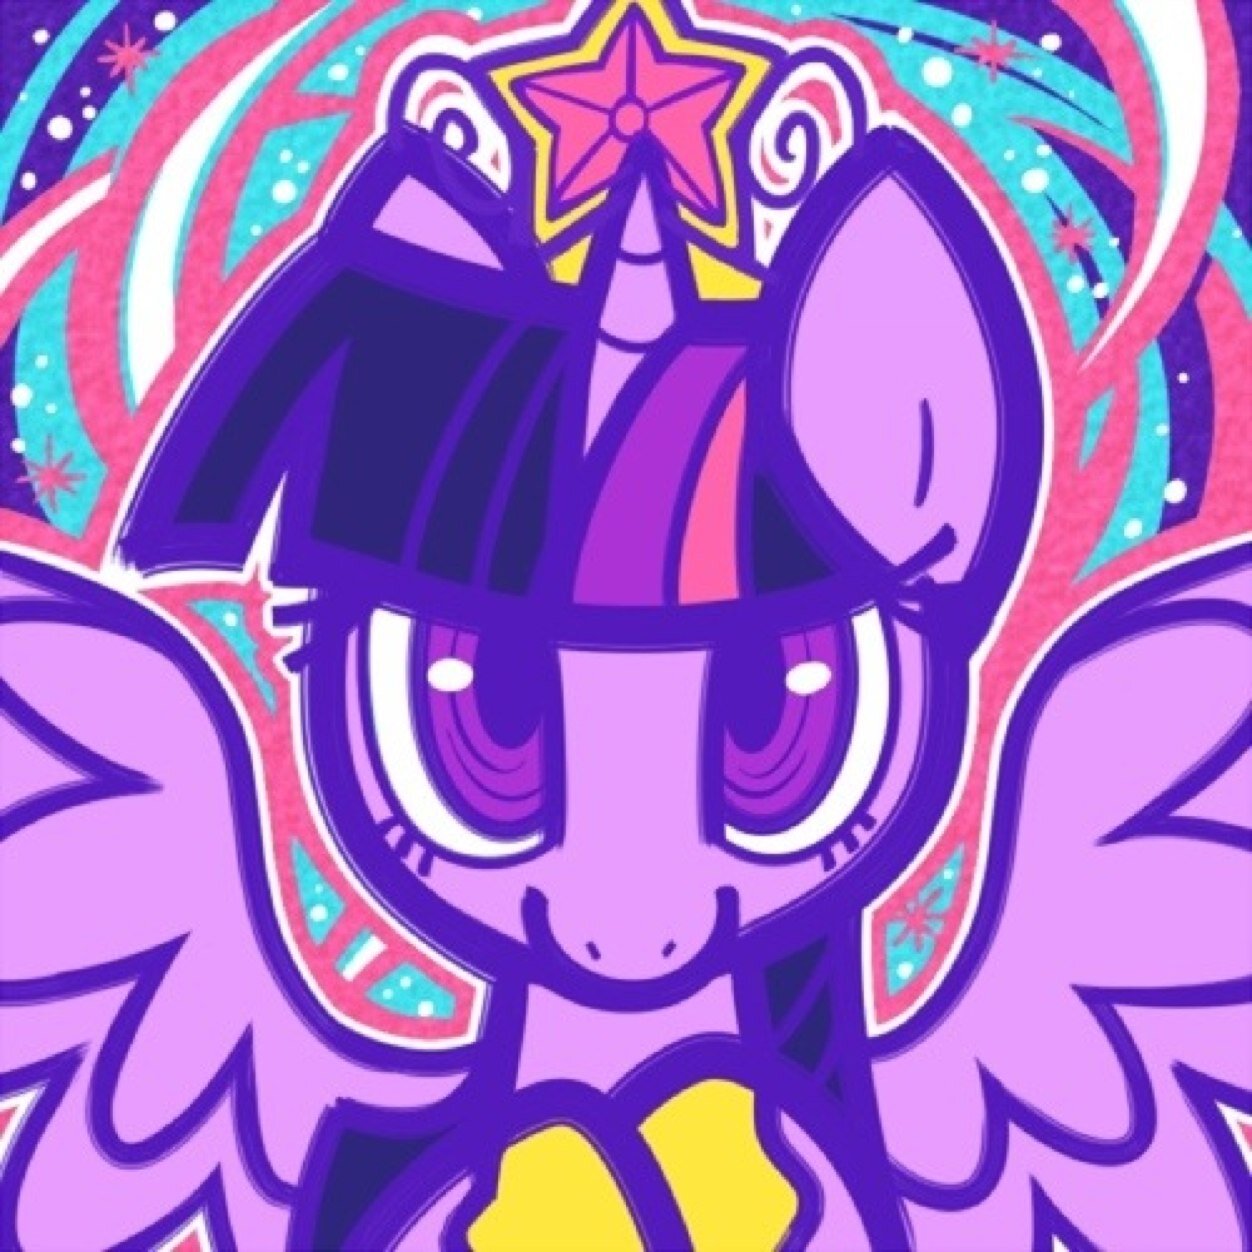 Im Twilight Sparkle! I live in a tree and read books about magic!